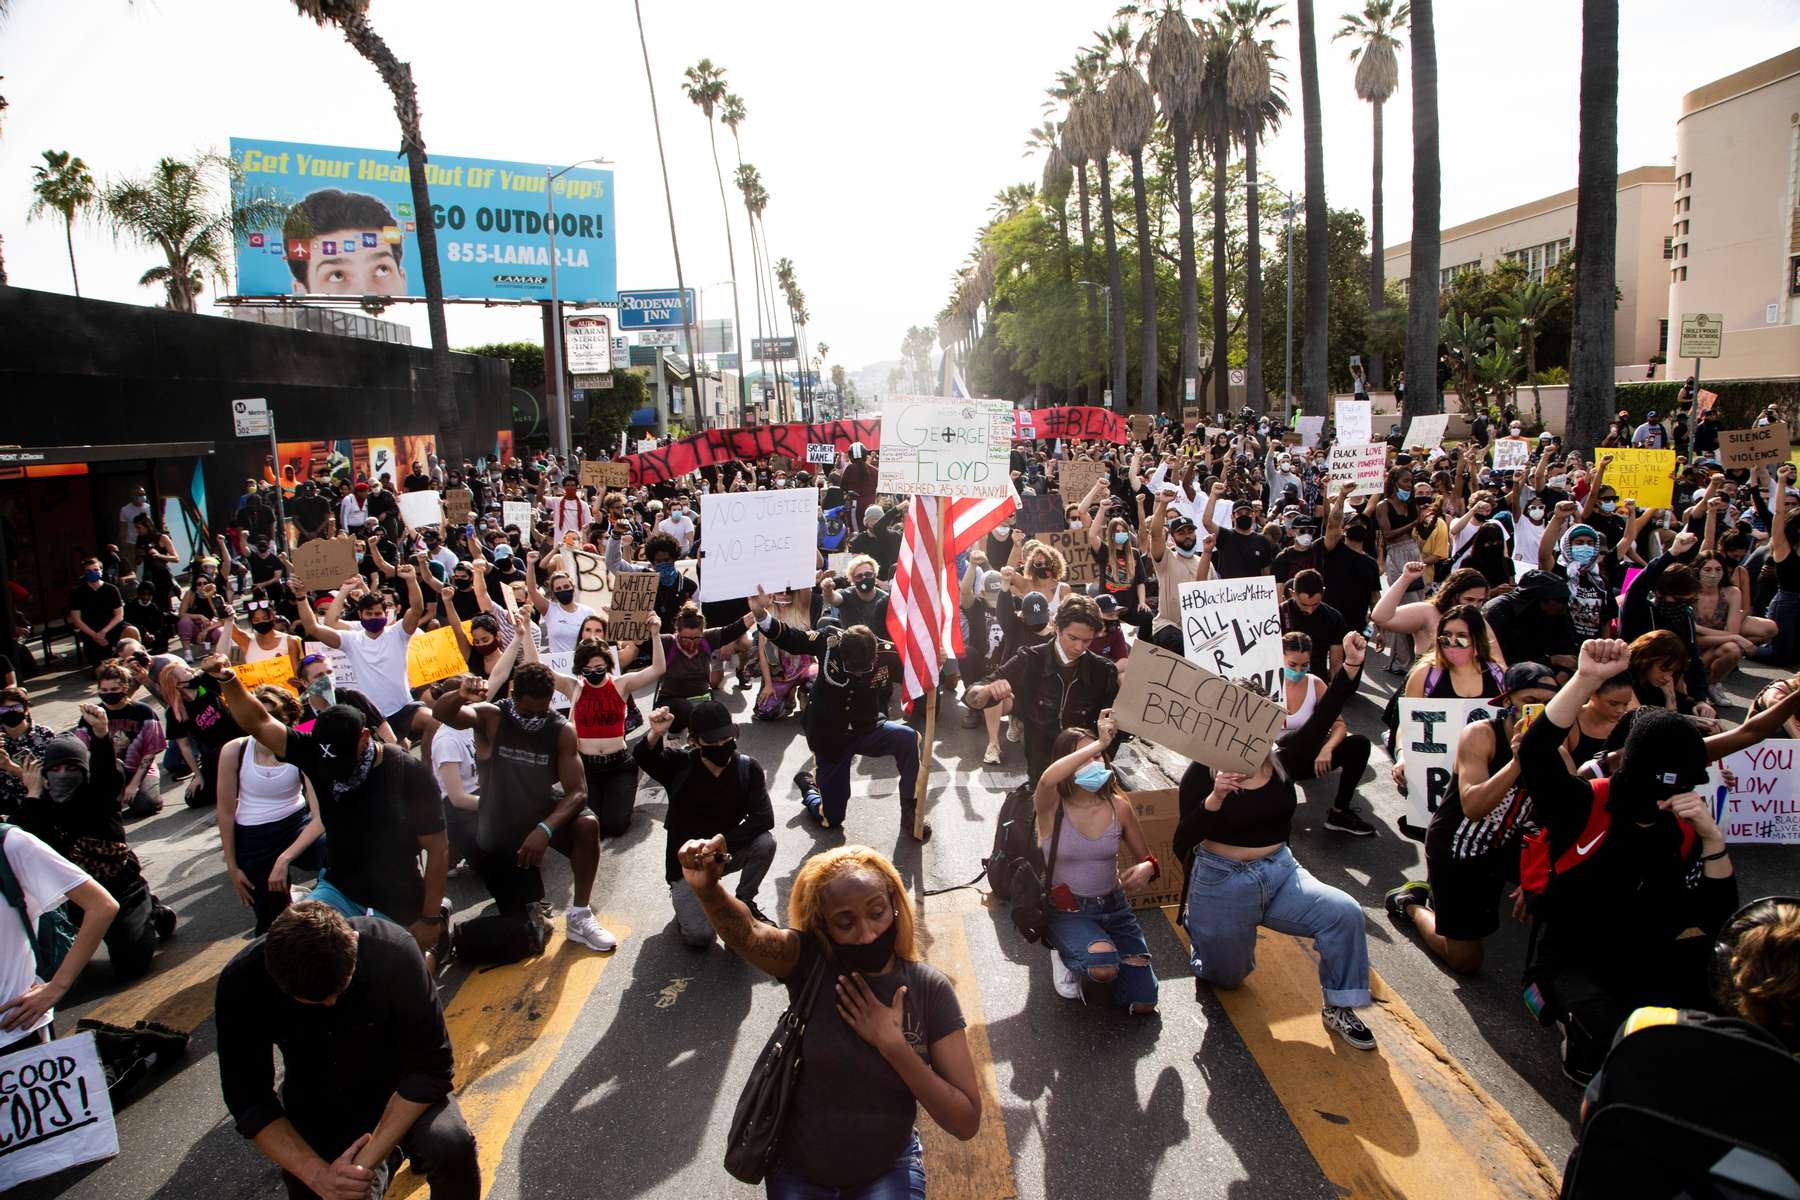 Protesters take a knee during a march over the death of George Floyd, an unarmed black man, who died after a police officer kneeled on his neck for several minutes in the Hollywood neighborhood on June 1, 2020, in Los Angeles, California.